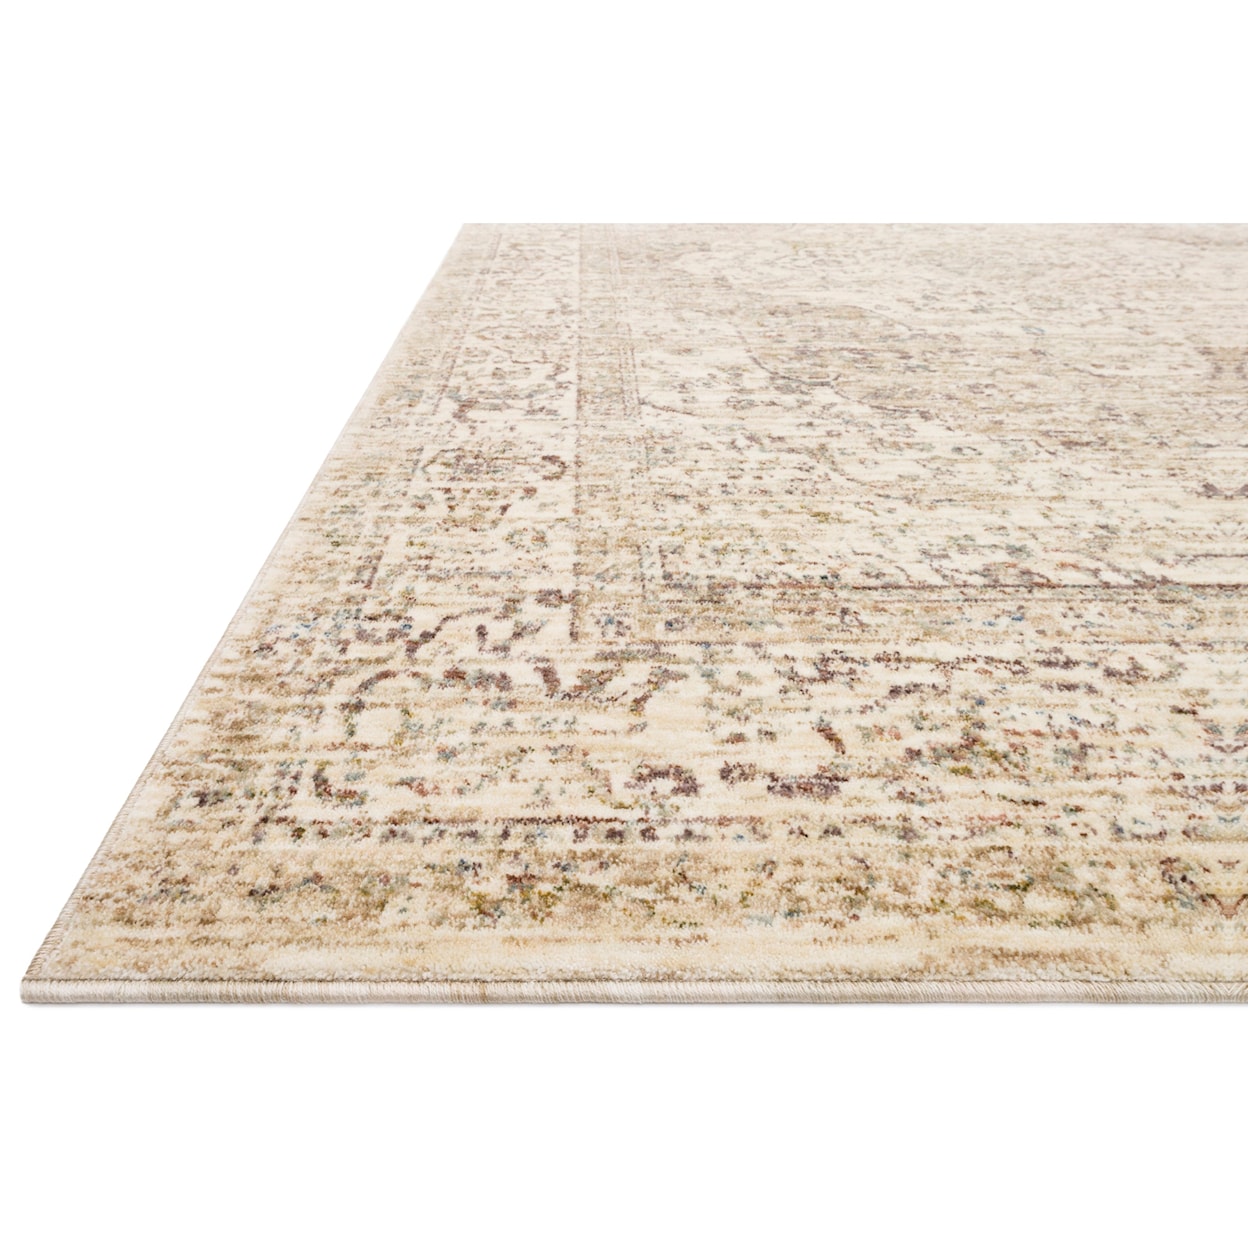 Reeds Rugs Revere 3'9" x 5'9" Ivory / Berry Rug